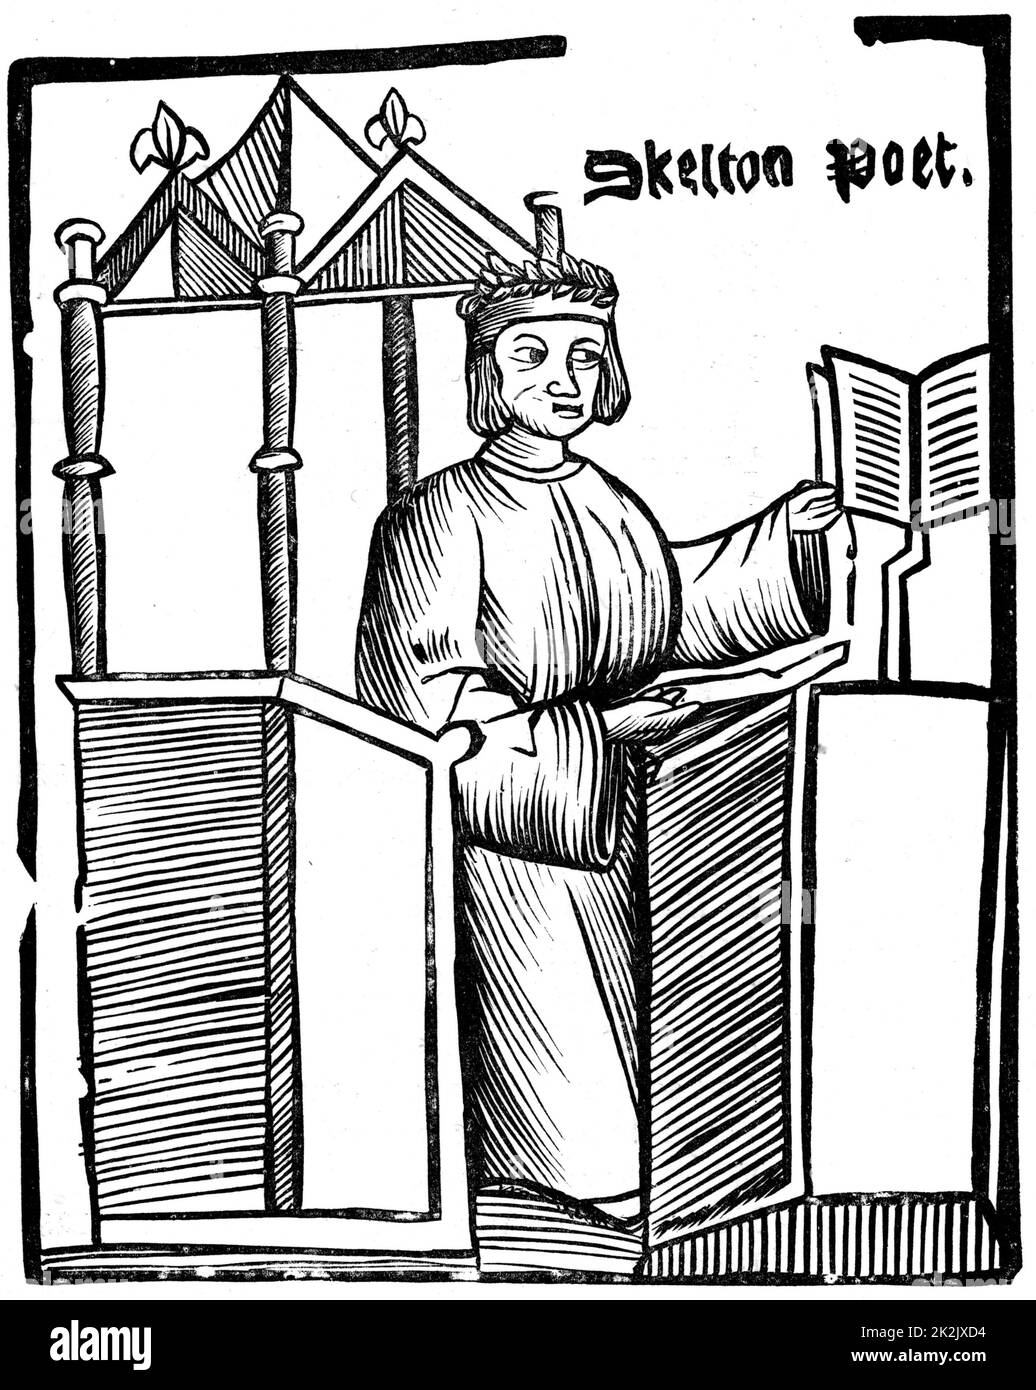 John Skelton (1460?-1529) English satirical poet. Tutor to Prince Henry (later Henry VIII). From an edition of 'Colyn Cloute' his long poem against Cardinal Wolsey. Woodcut Stock Photo